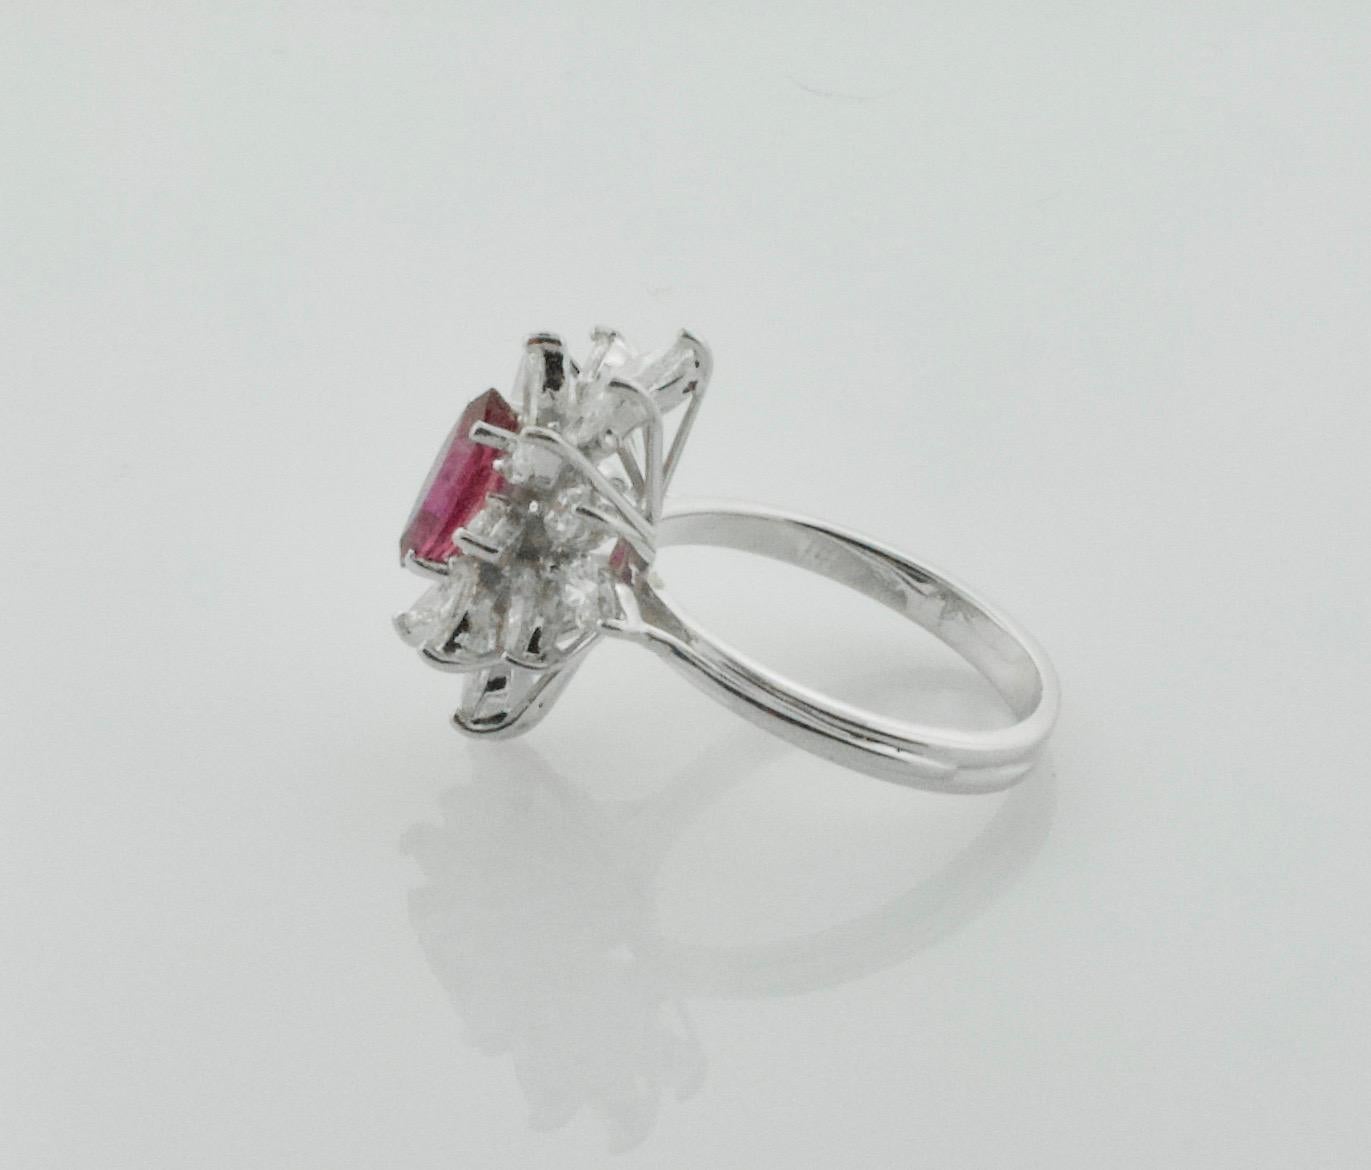 Delightful Marquise Cut Ruby and Diamond Cocktail Ring in 18 Karat 3